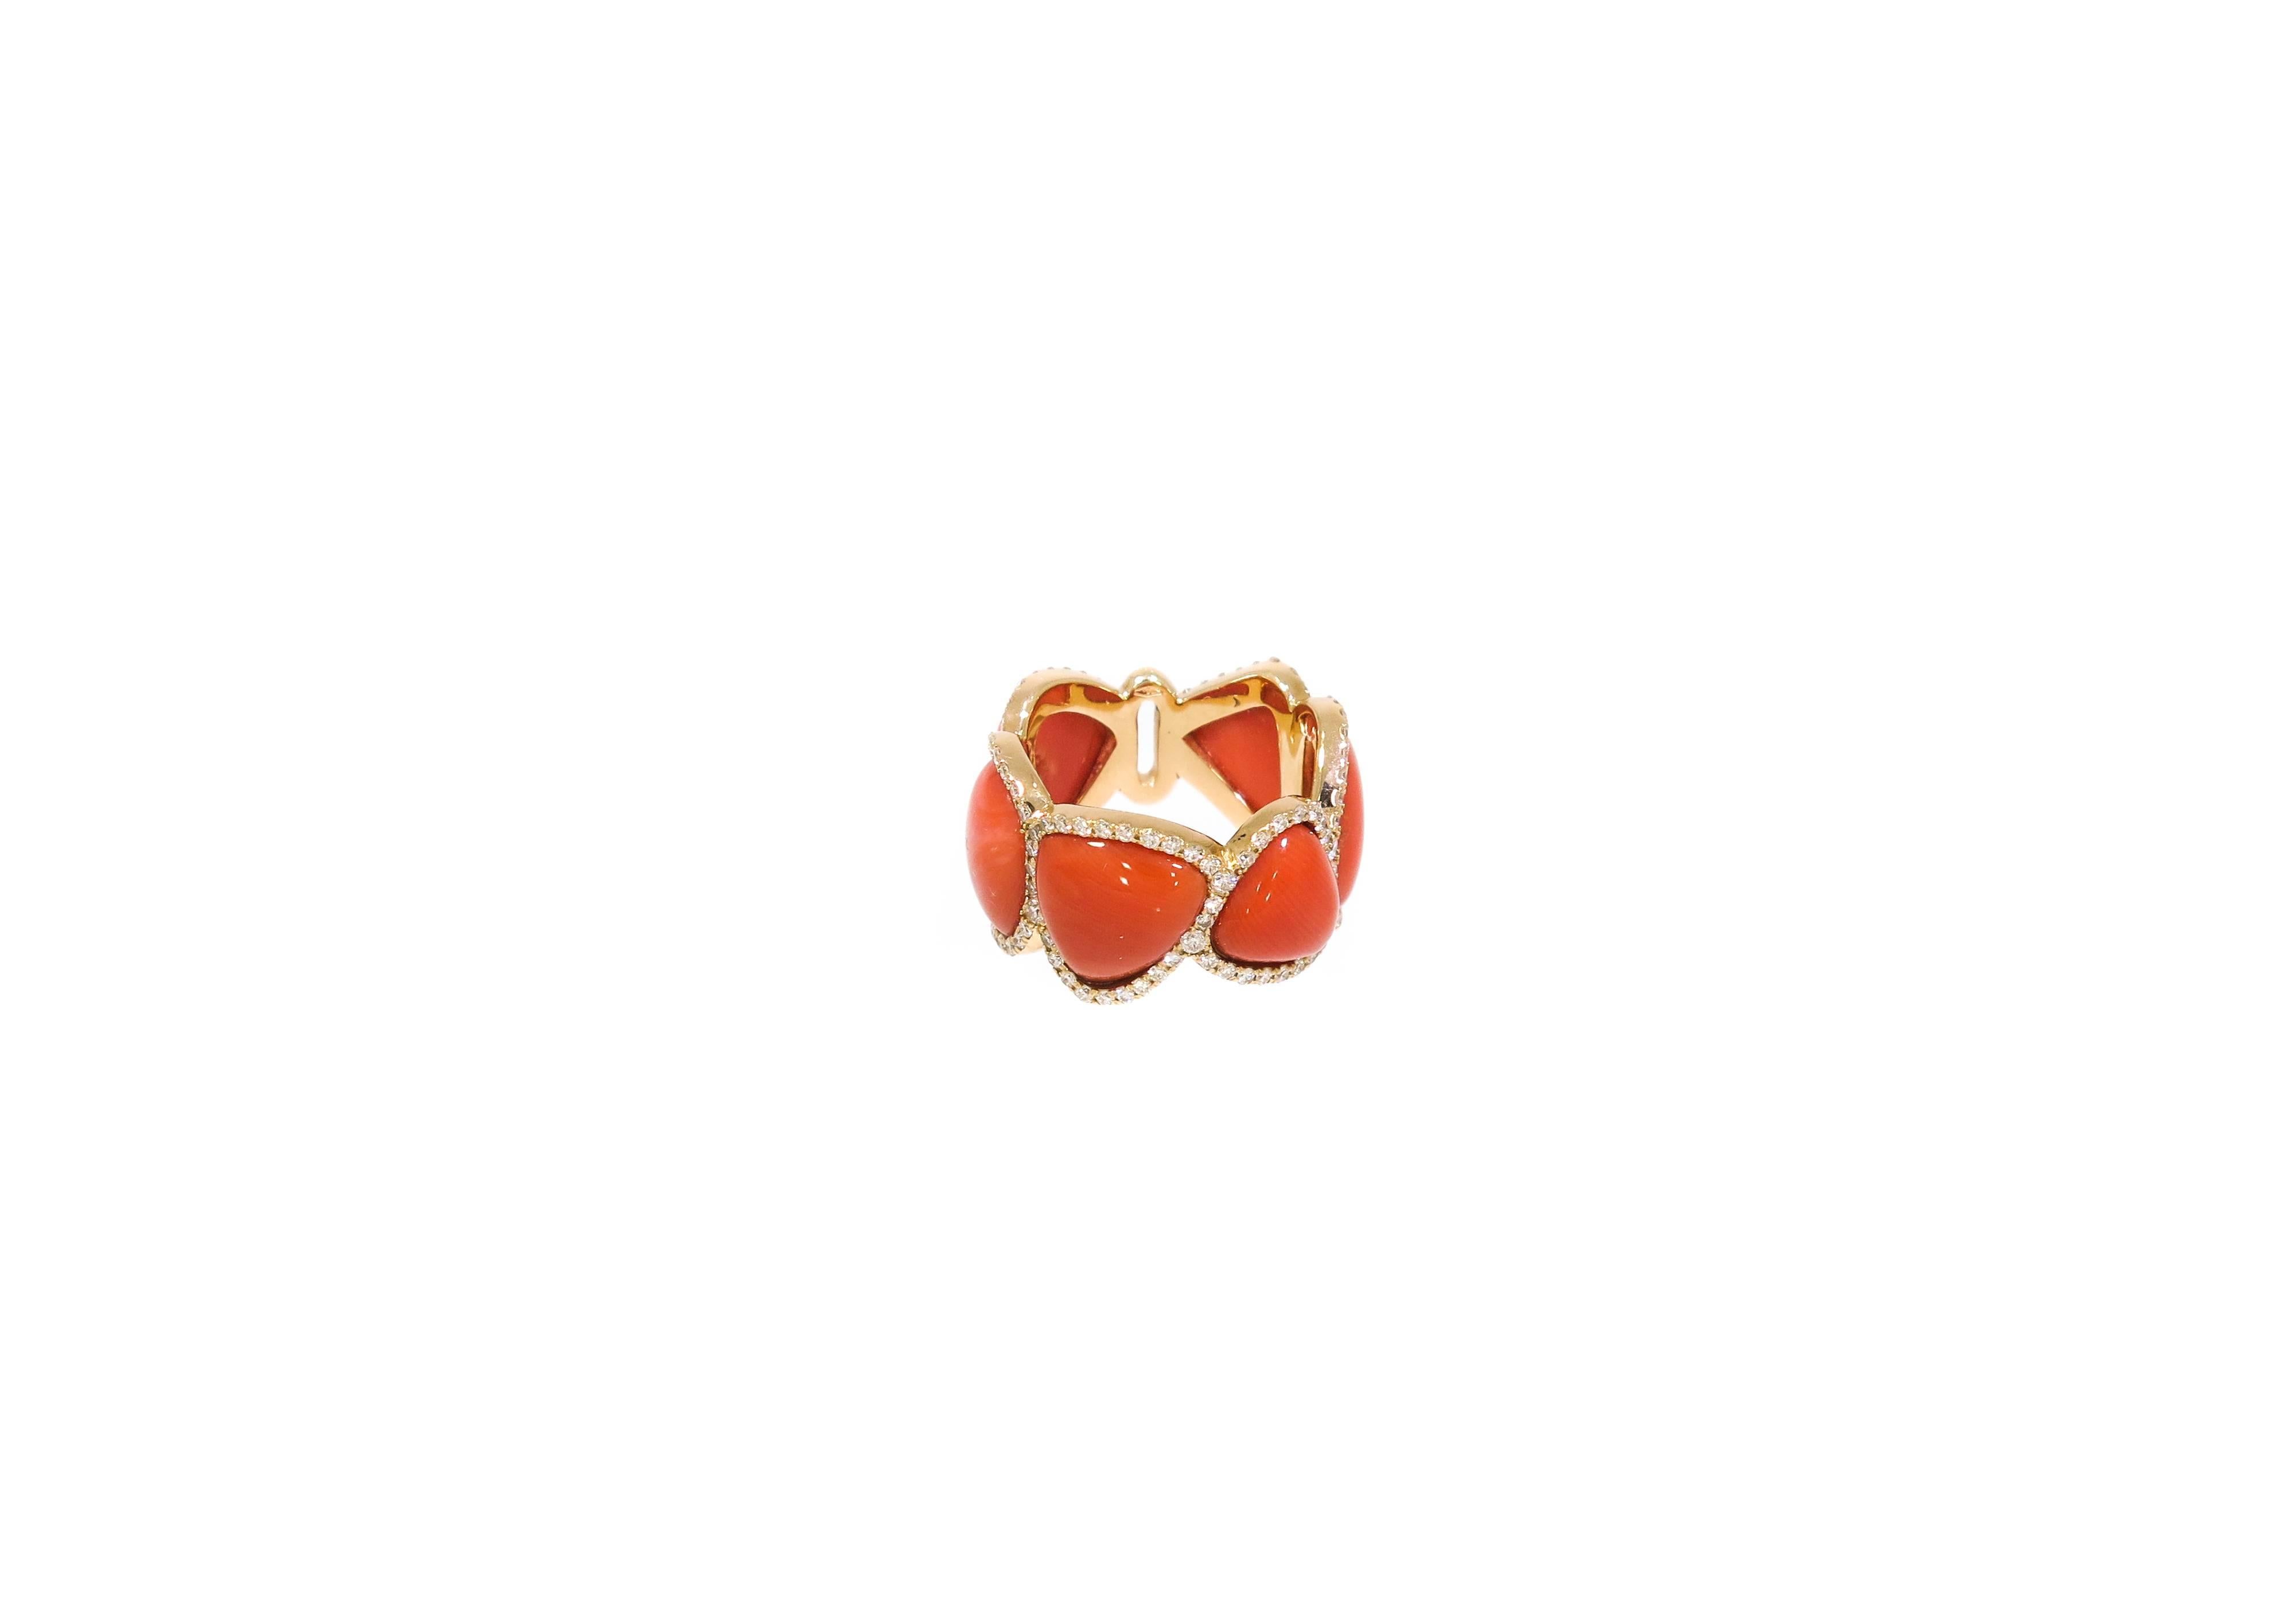 Coral is not a mined stone or mineral, but an organic gemstone. It is the hardened, result of secretions continuously deposited by marine polyps. It looks like a colorful underwater plant, but is actually a priceless gift from the sea. The Italian